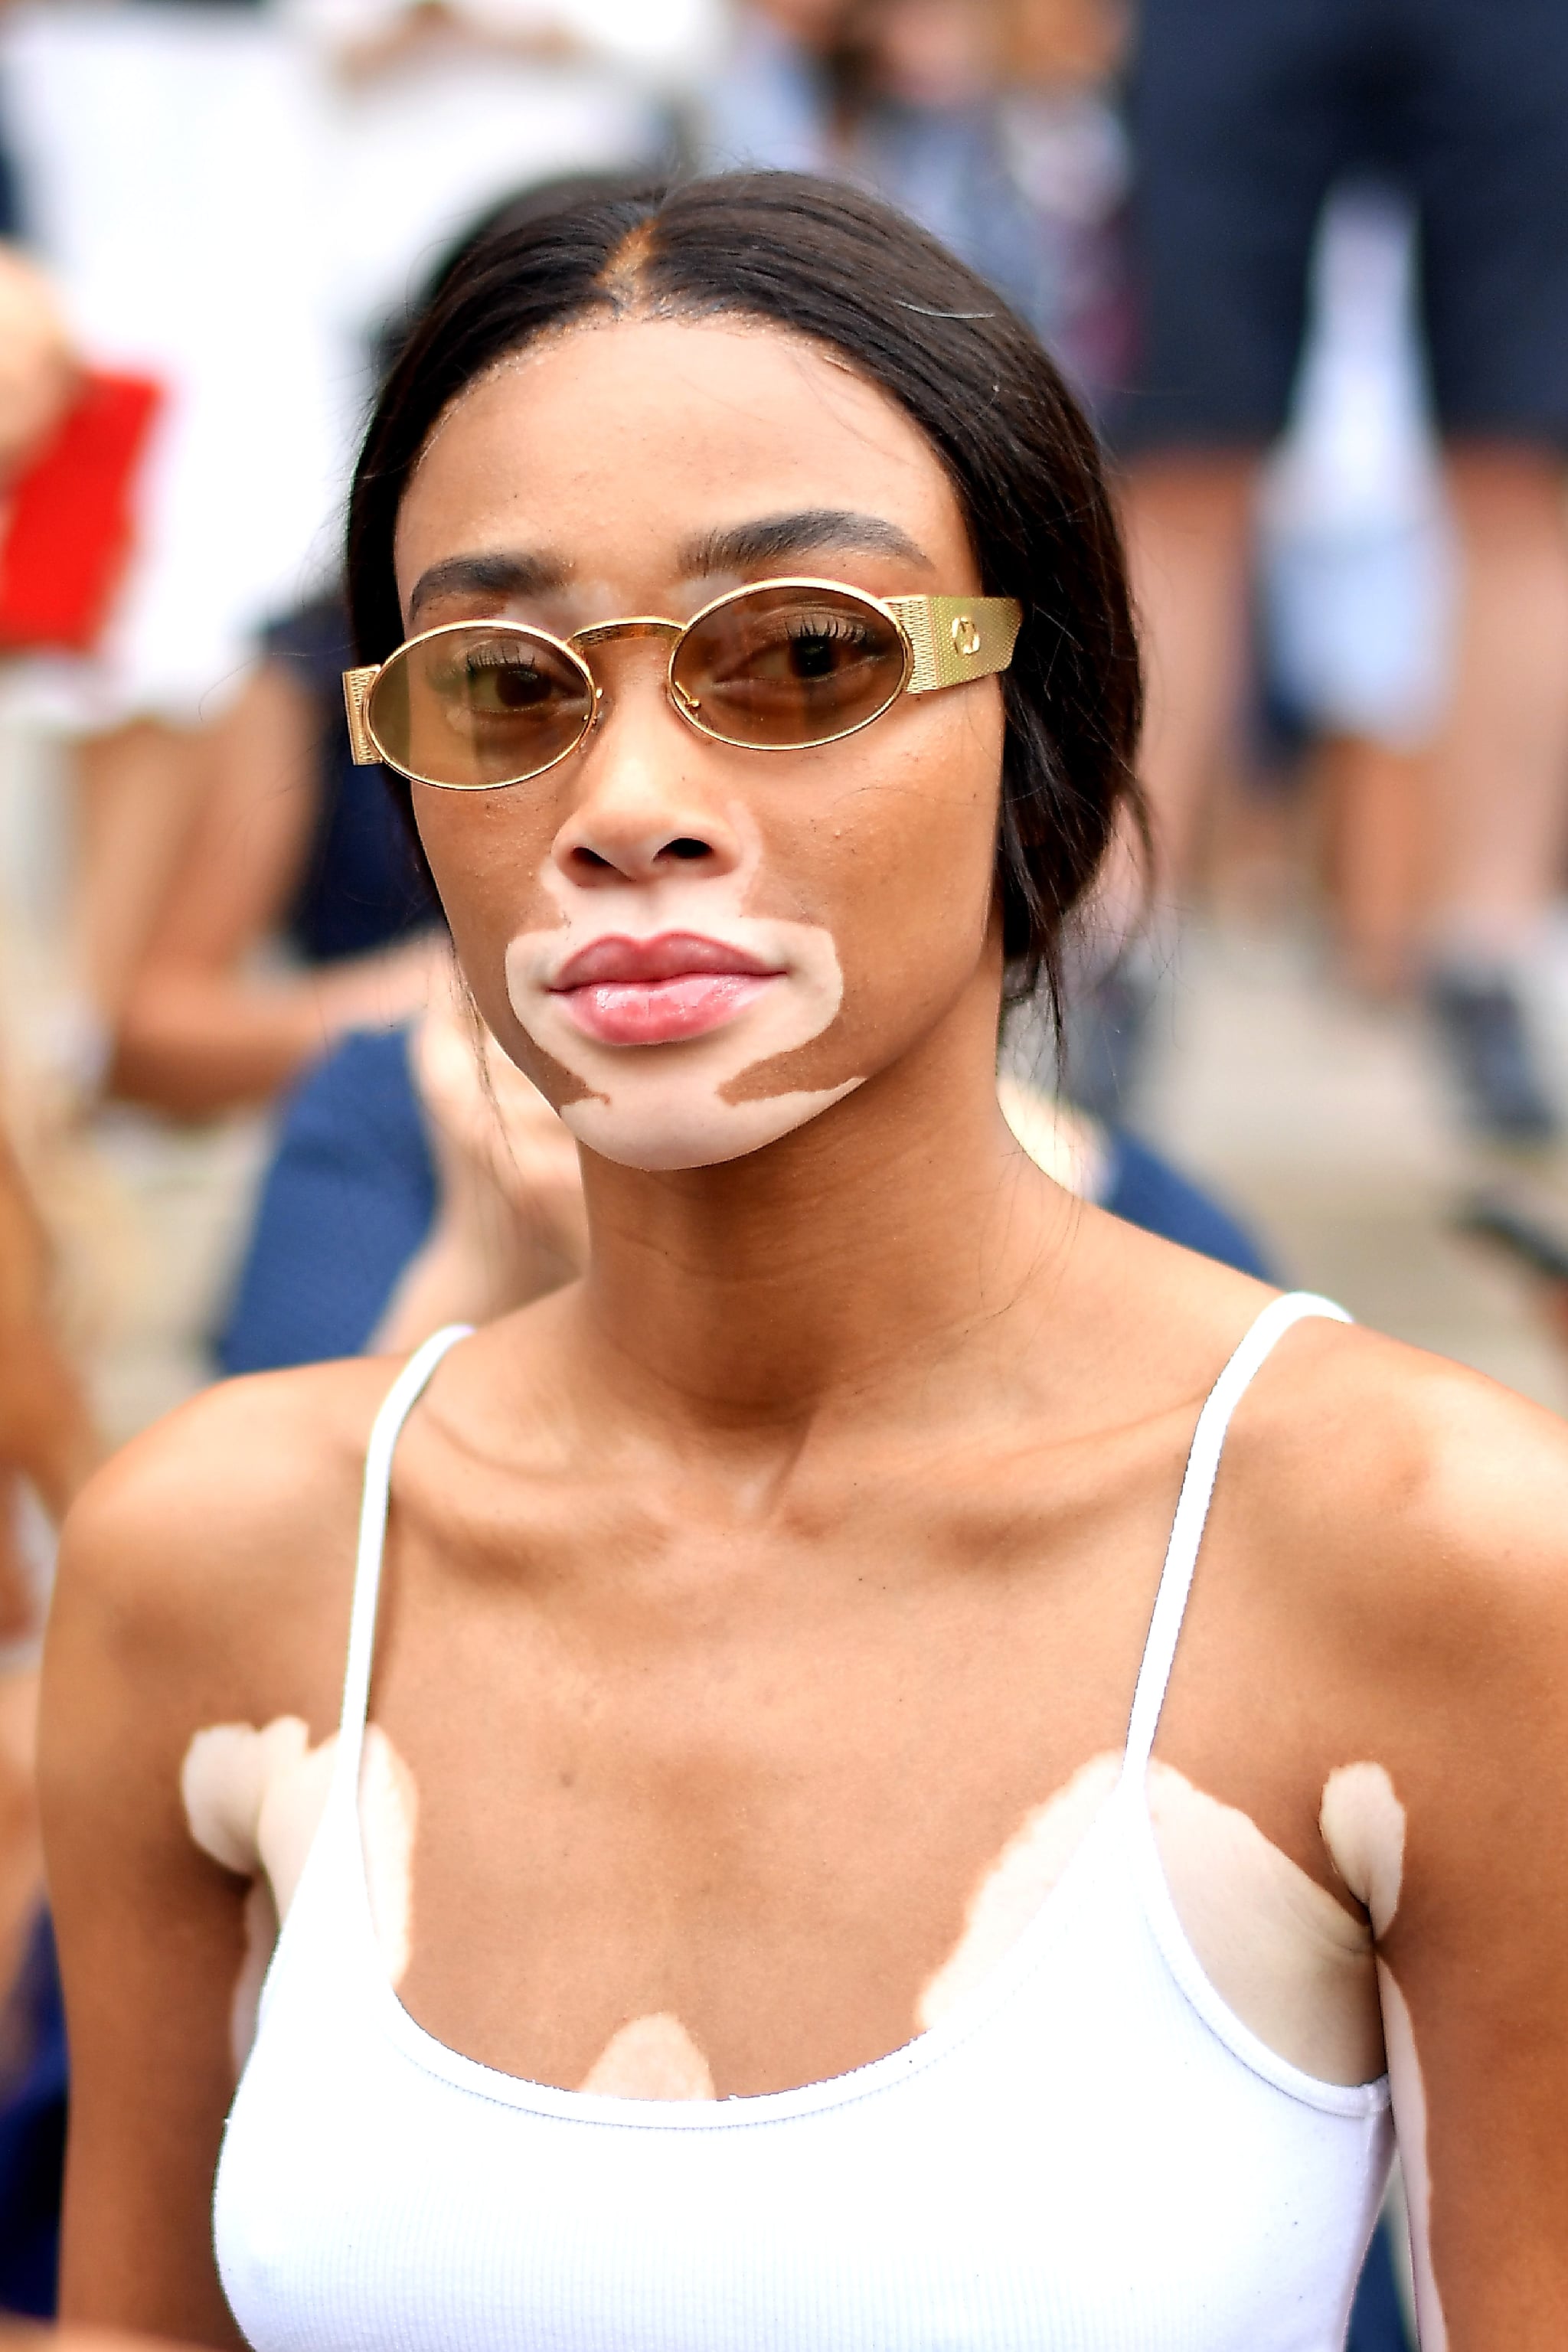 PARIS, FRANCE - JULY 02:  Winnie Harlow is seen at the Schiaparelli Haute Couture Fall Winter 2018/2019 Show on July 2, 2018 in Paris, France.  (Photo by Jacopo Raule/GC Images)